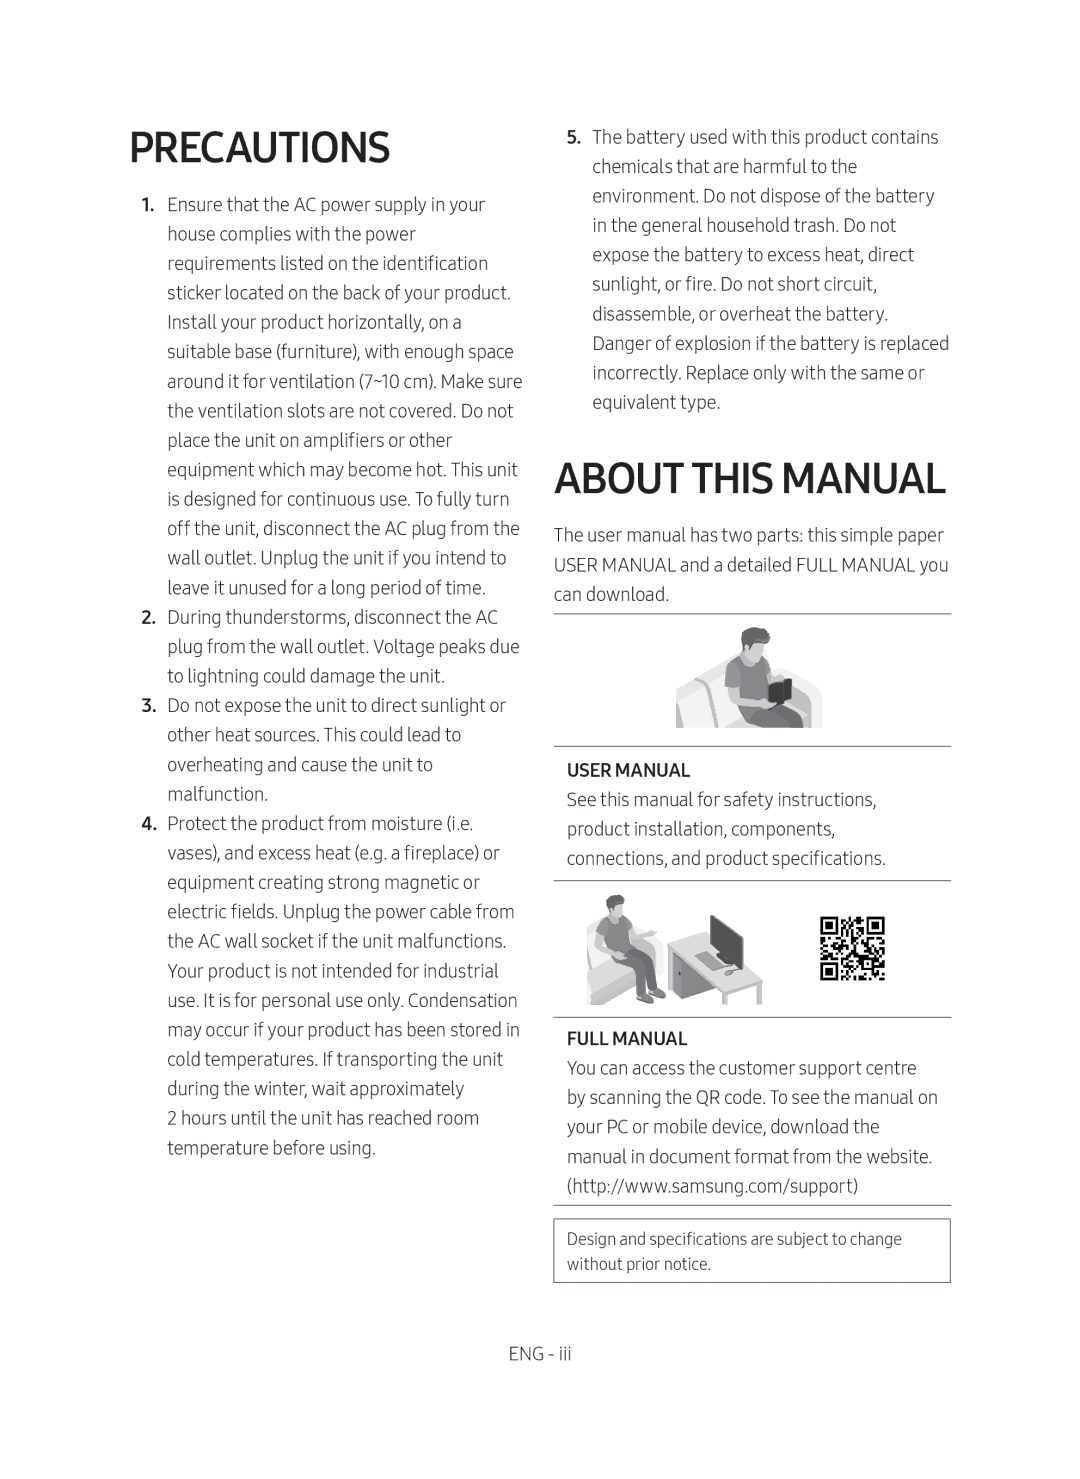 Samsung HW-M4501/ZF manual Precautions, About this Manual 